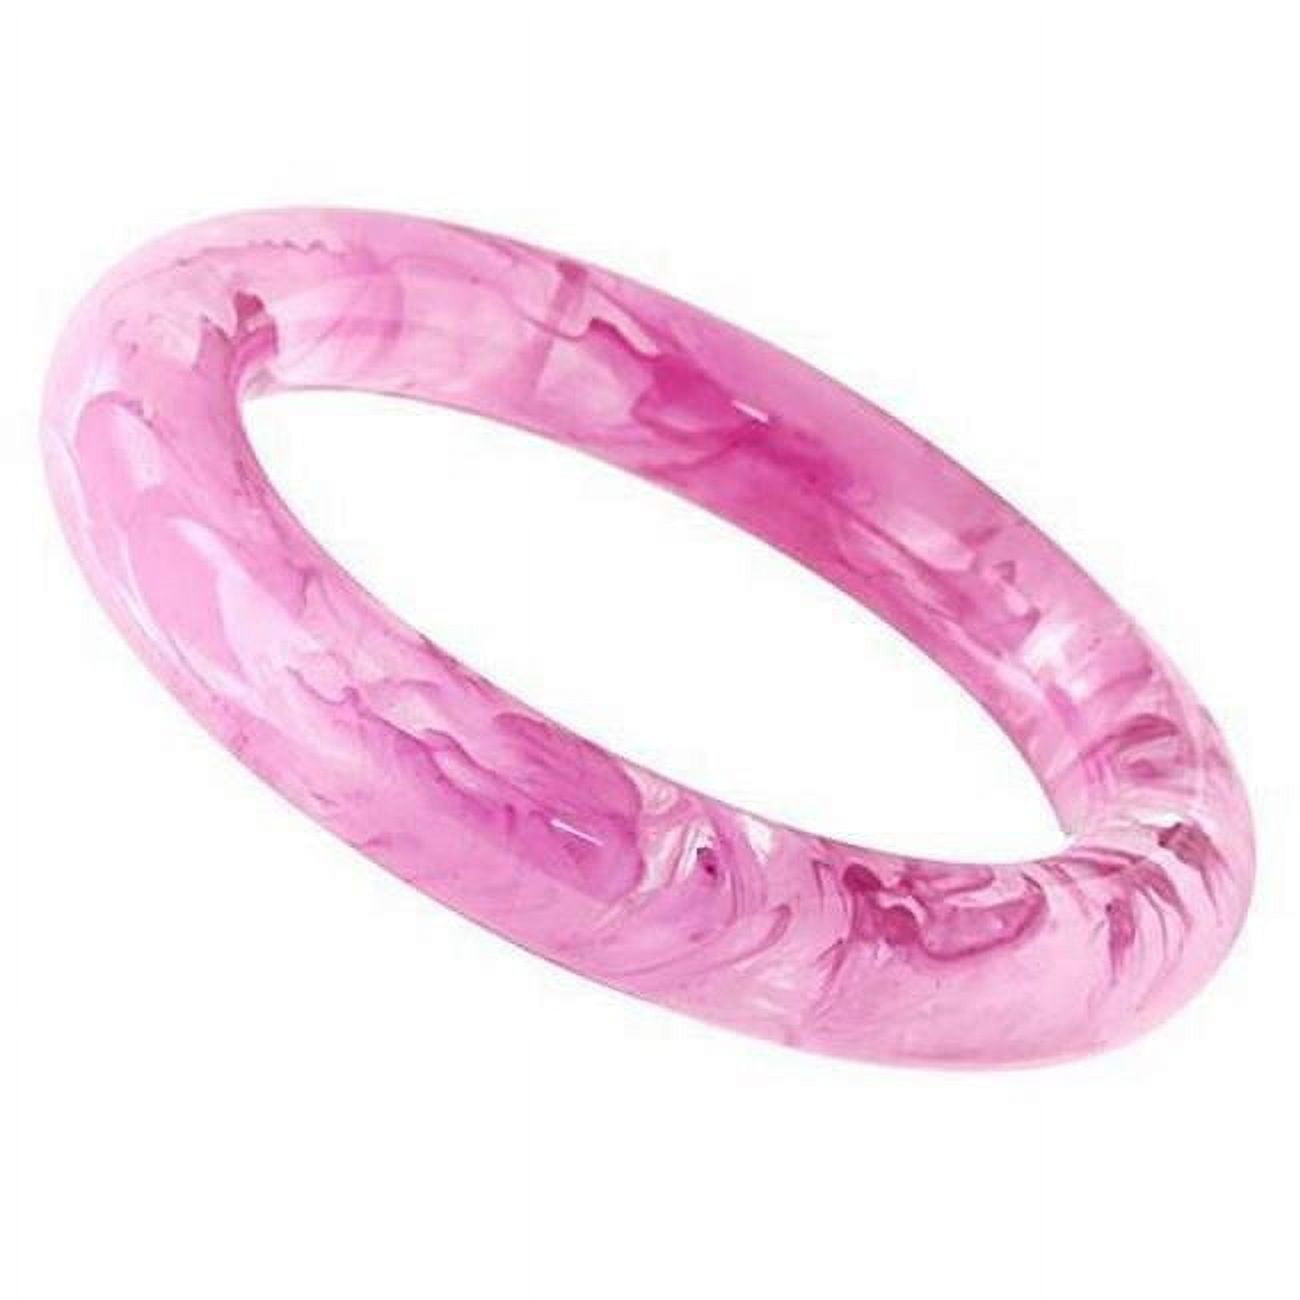 Picture of Alamode VL055-7.25 7.25 in. Resin Bangle with No Stone, Light Peach